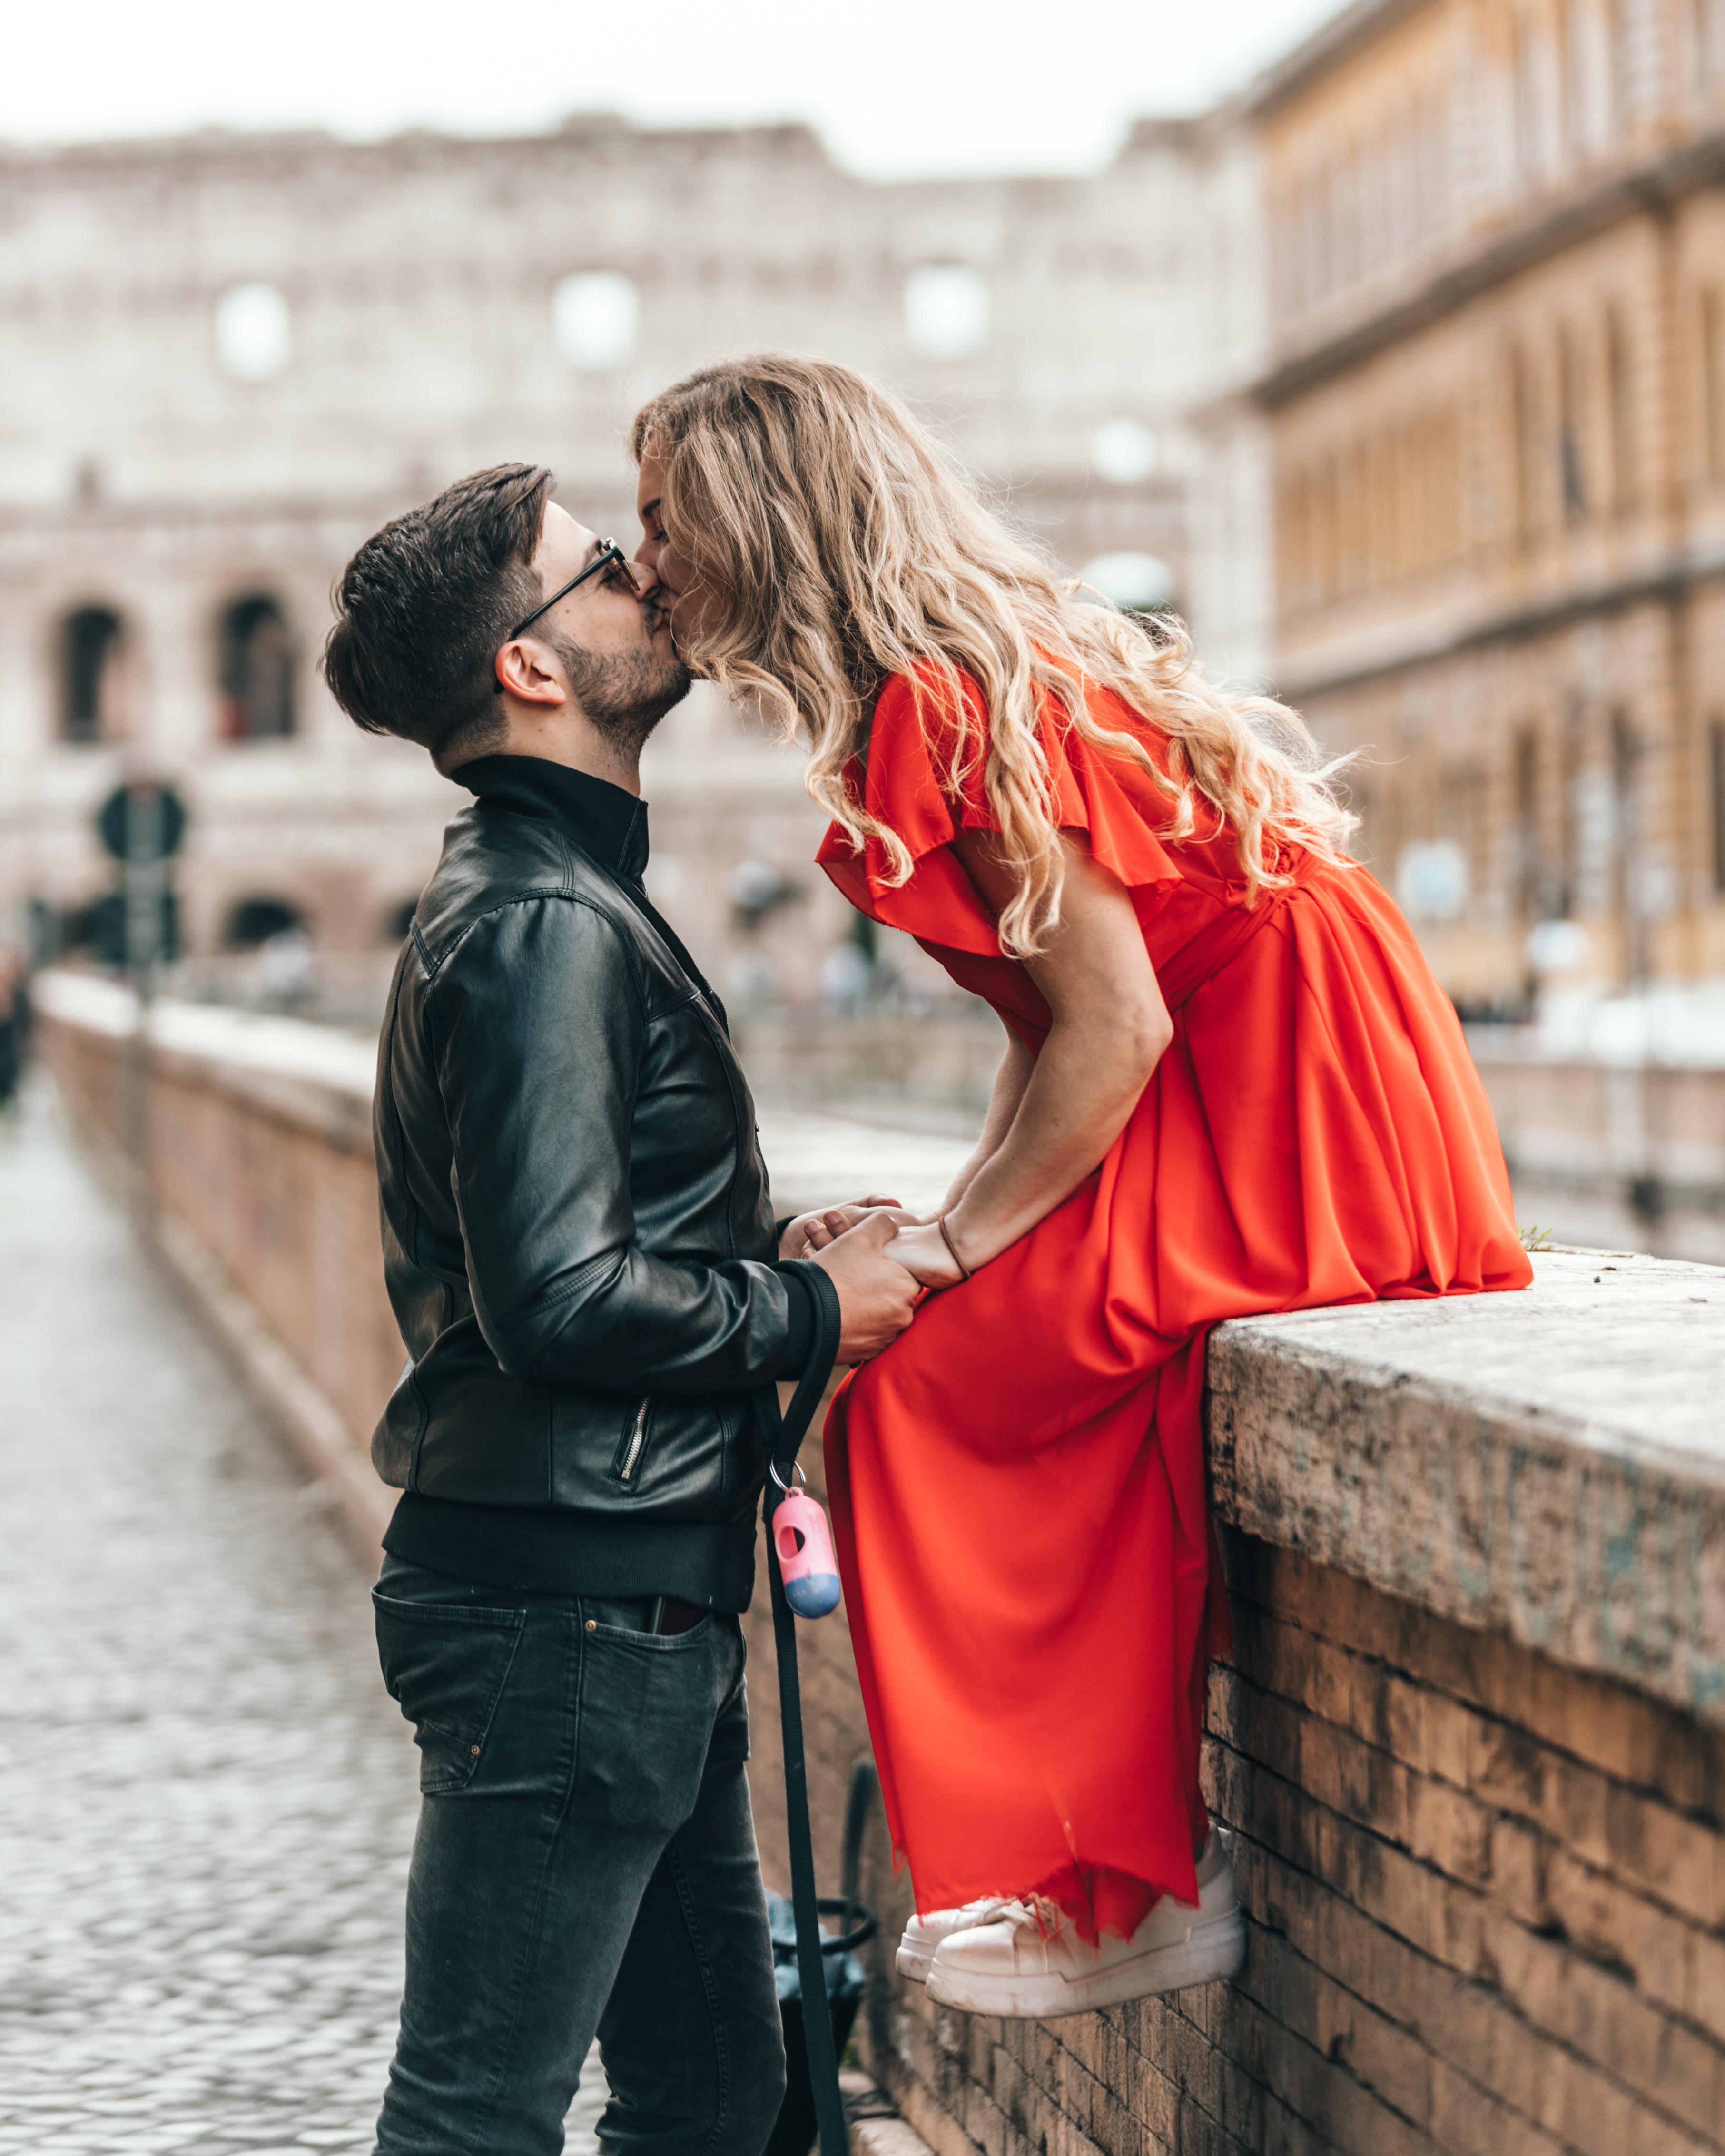 A photo of a man and a woman kissing outdoors  | Source: Unsplash